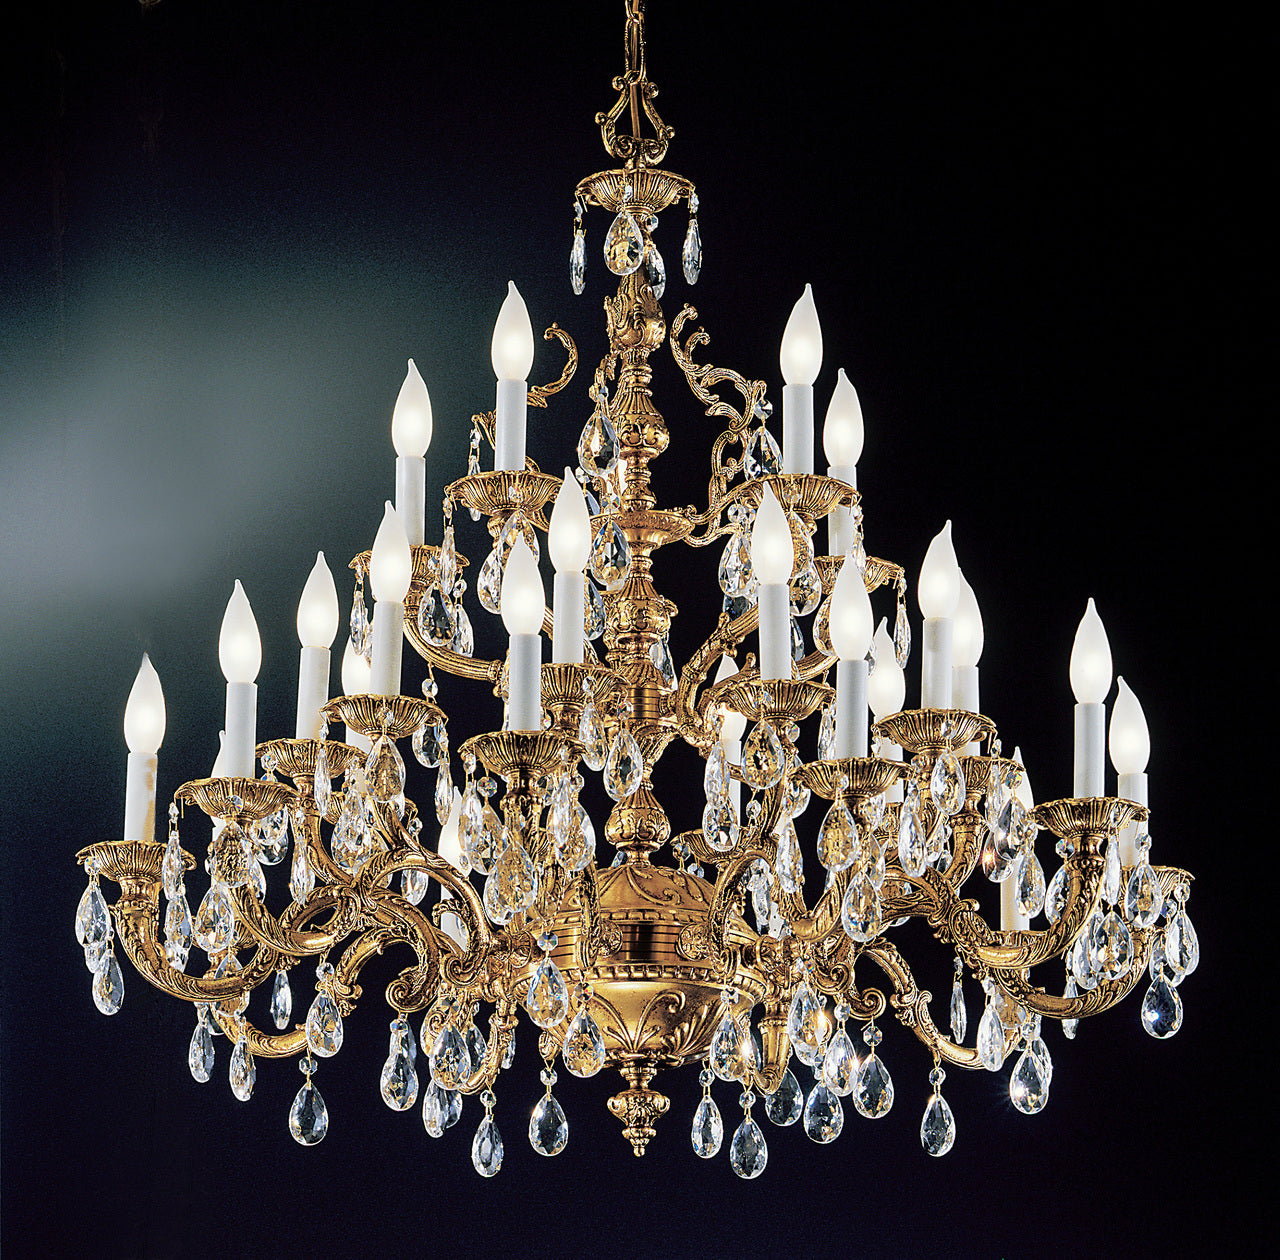 Classic Lighting 5525 OWB I Barcelona Crystal/Cast Brass Chandelier in Olde World Bronze (Imported from Spain)